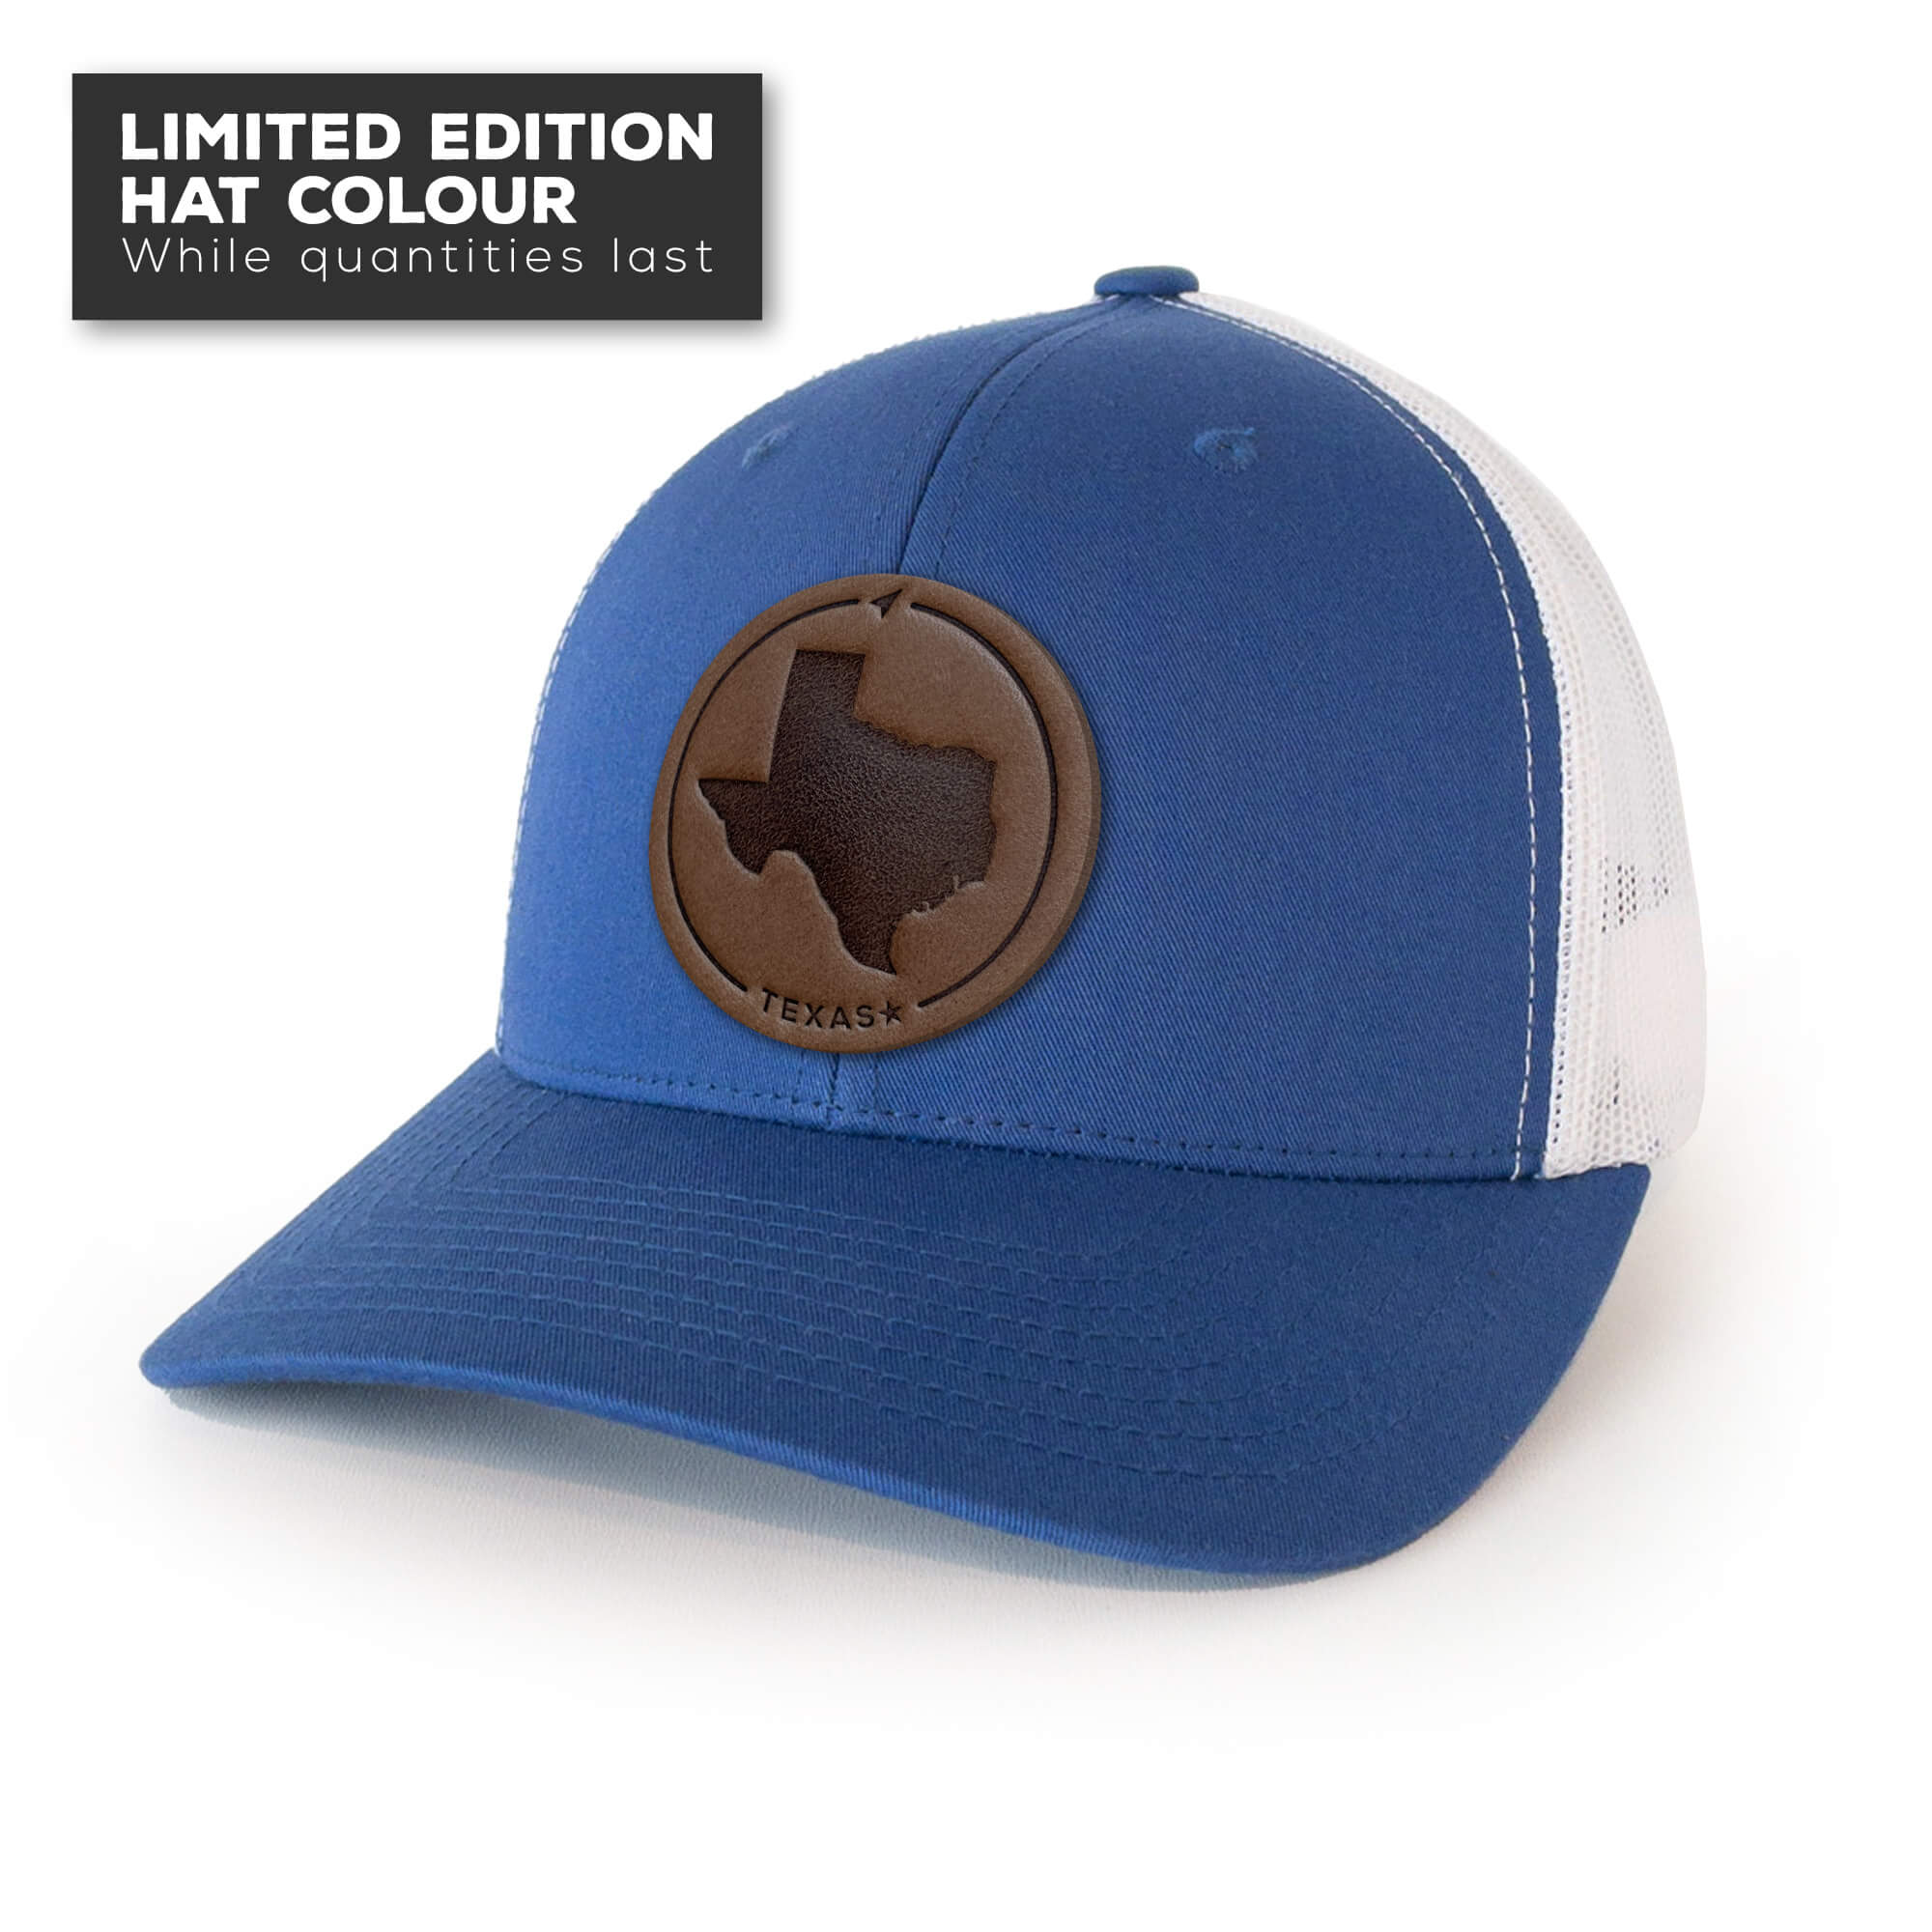 Royal Blue trucker hat with full-grain leather patch of Texas